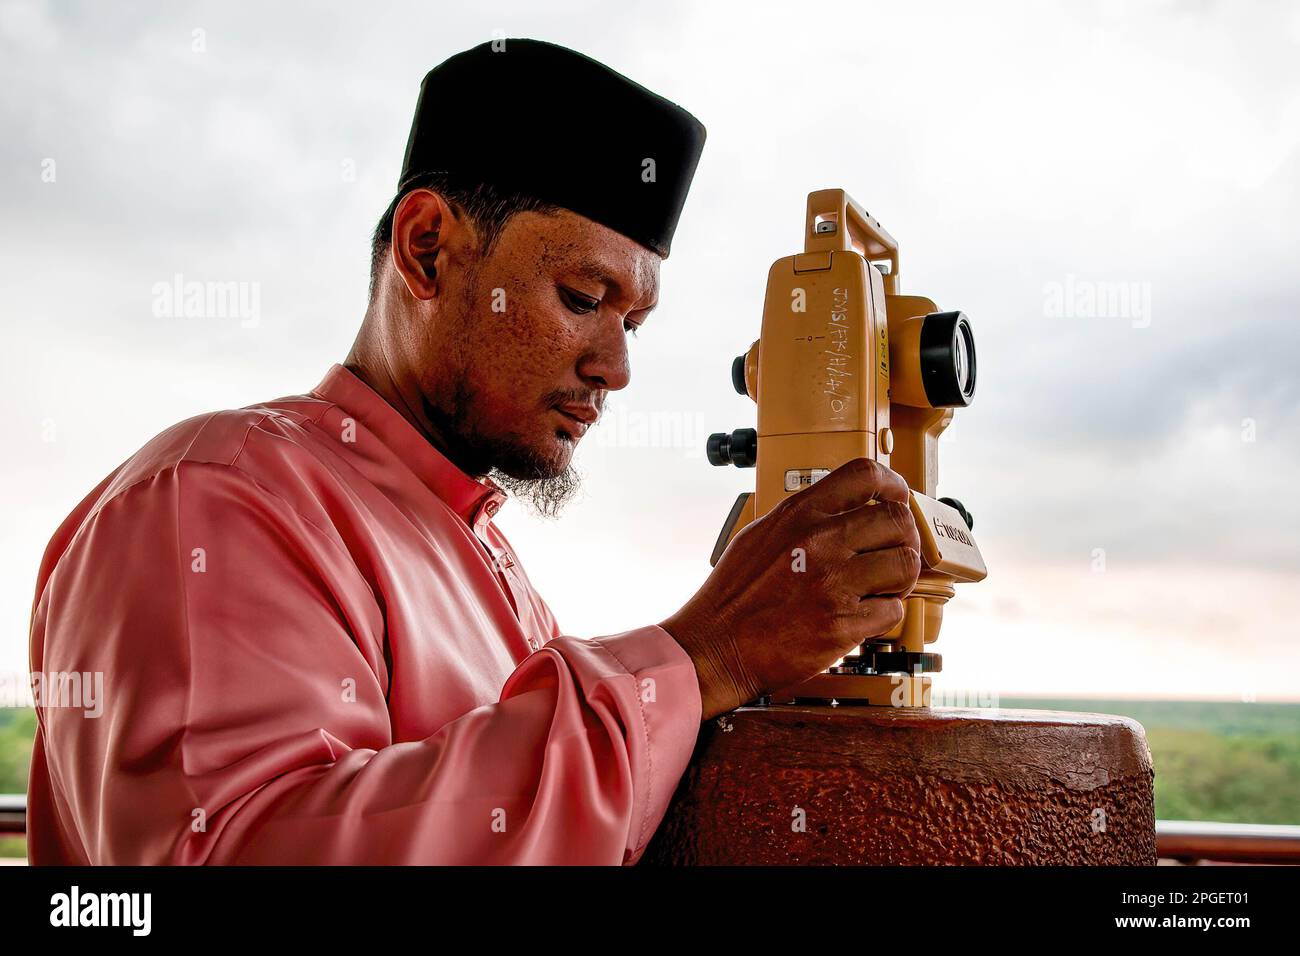 An official from the Selangor Islamic Religious Council is performing 'rukyah', a moon sighting ceremony to determine the start date of the holy month of Ramadan in Bukit Malawati. Stock Photo